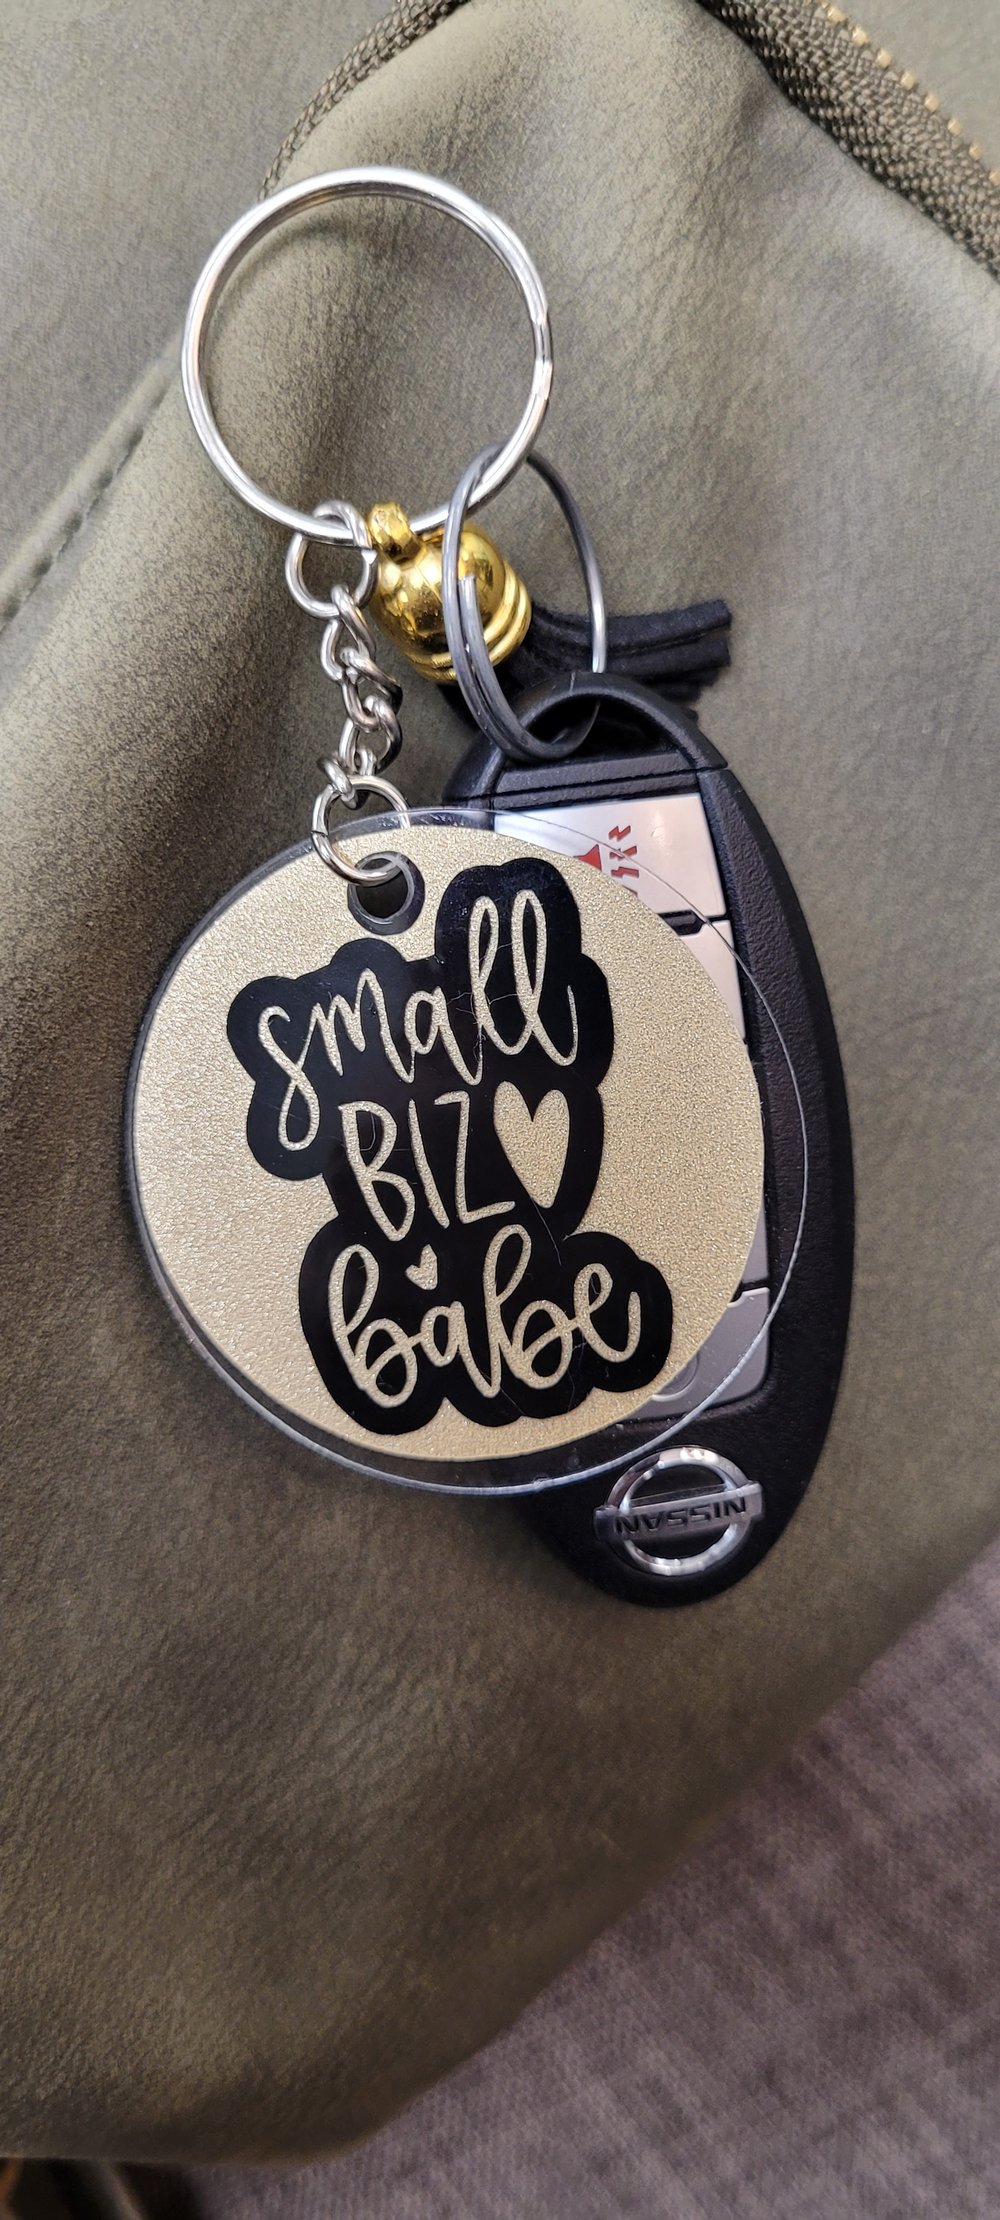 Image of Small Business Owner Keychains (Coming Soon)